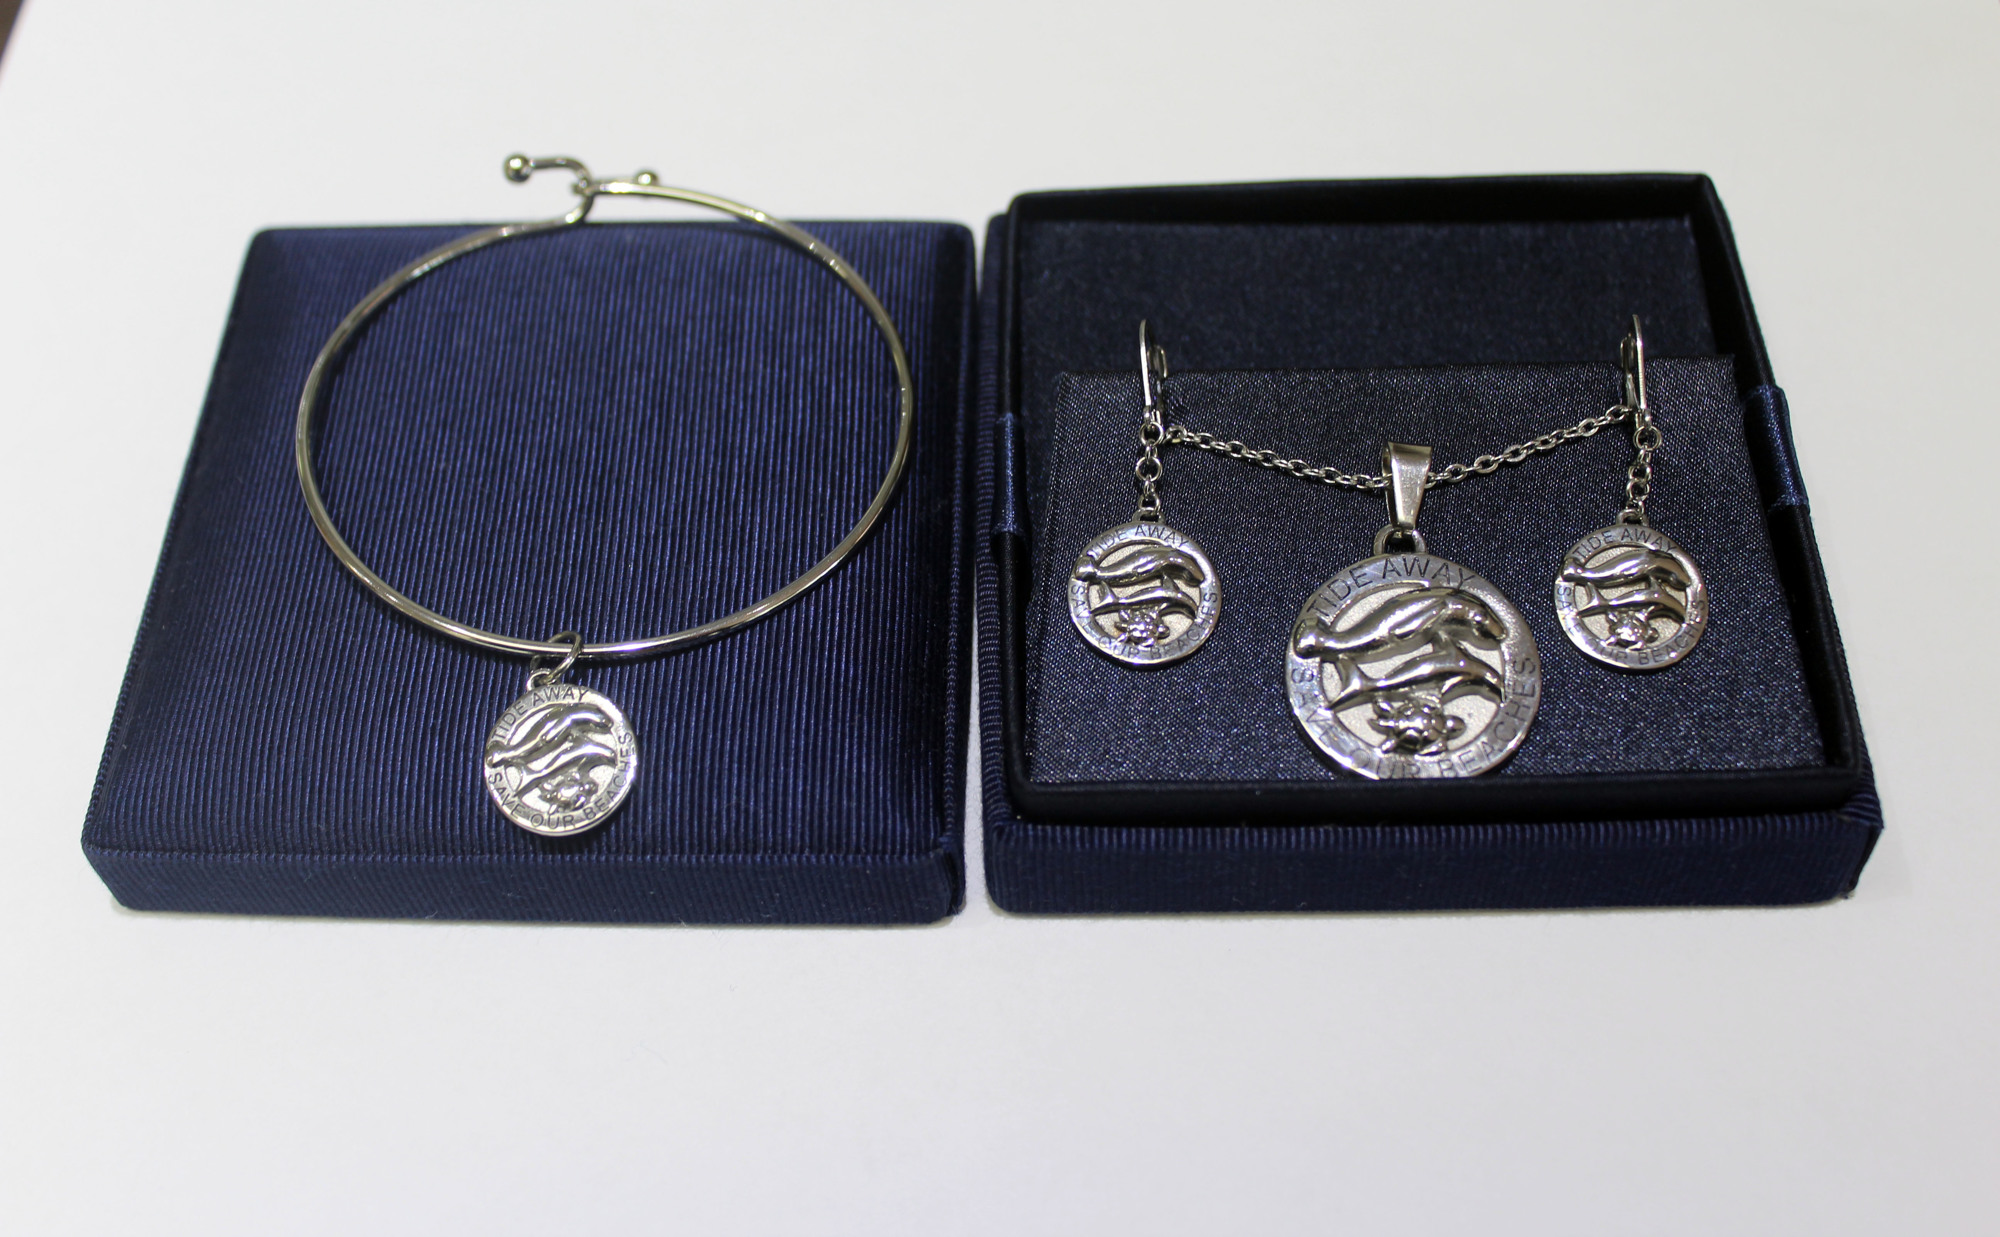 People can purchase the bracelet, pendant and earrings for $79 as part of the World Ocean Day special.